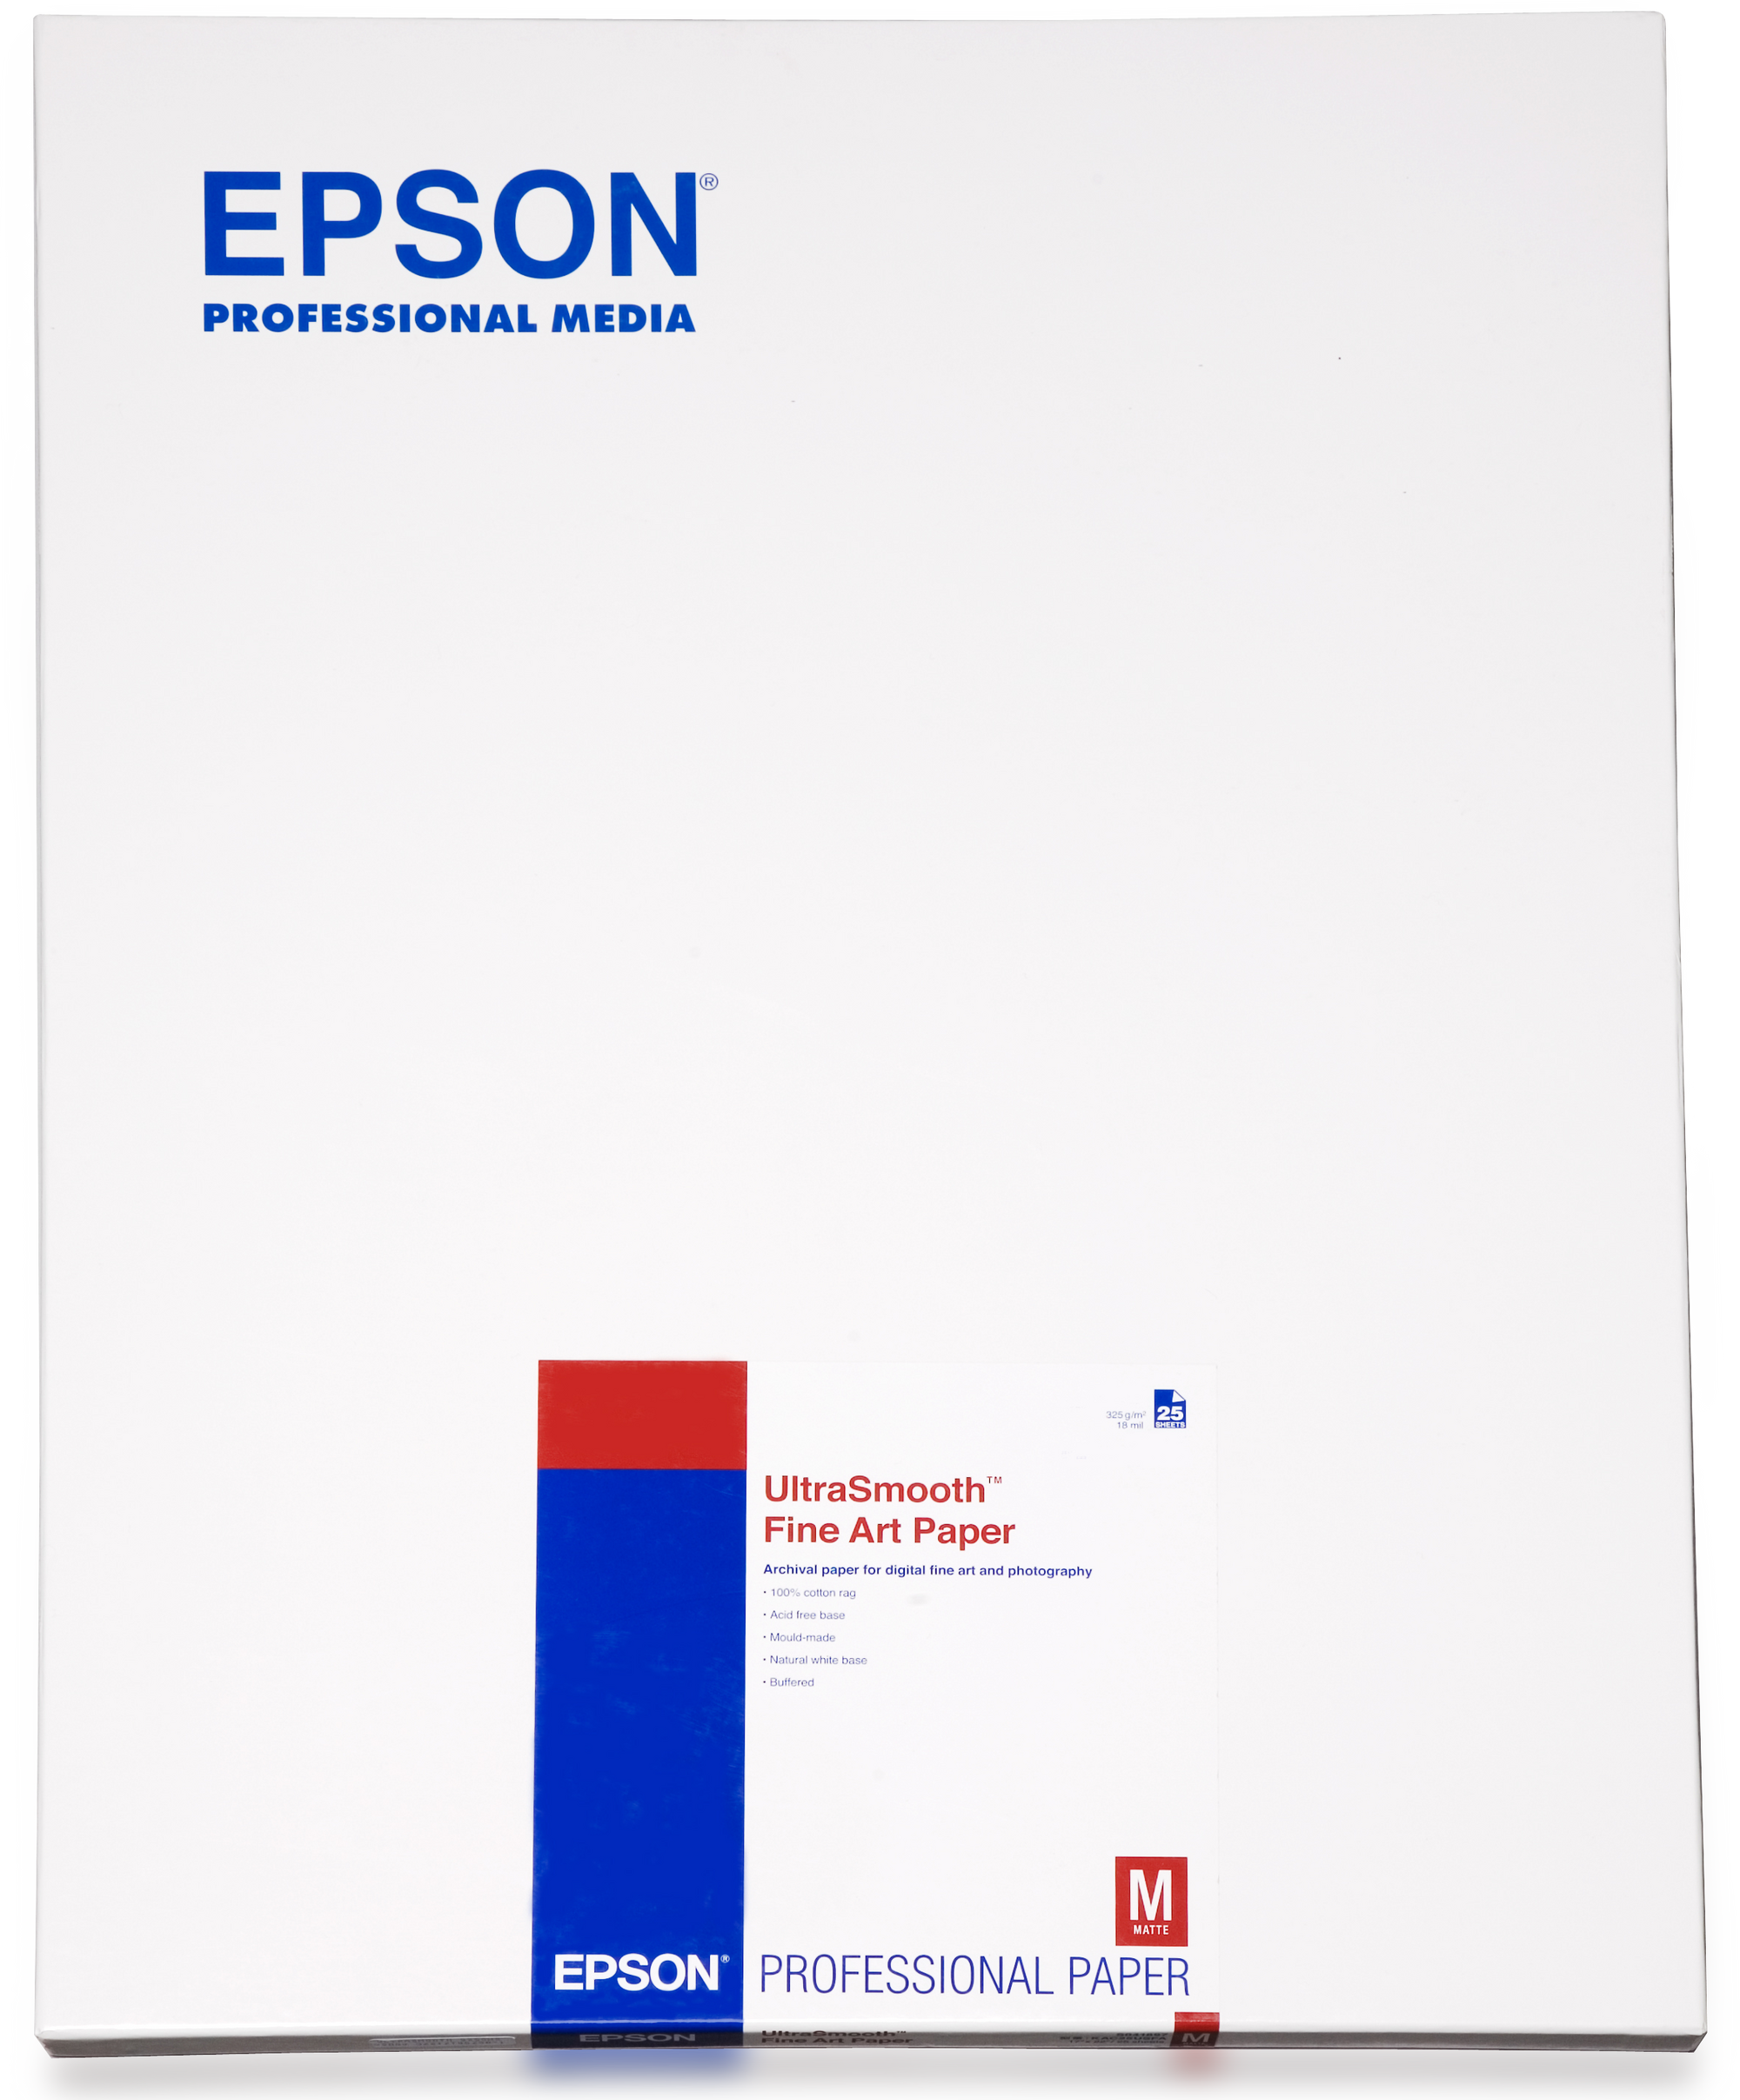 Epson Ultrasmooth Fine Art Paper - A2, 325g/m² - 25 sheets